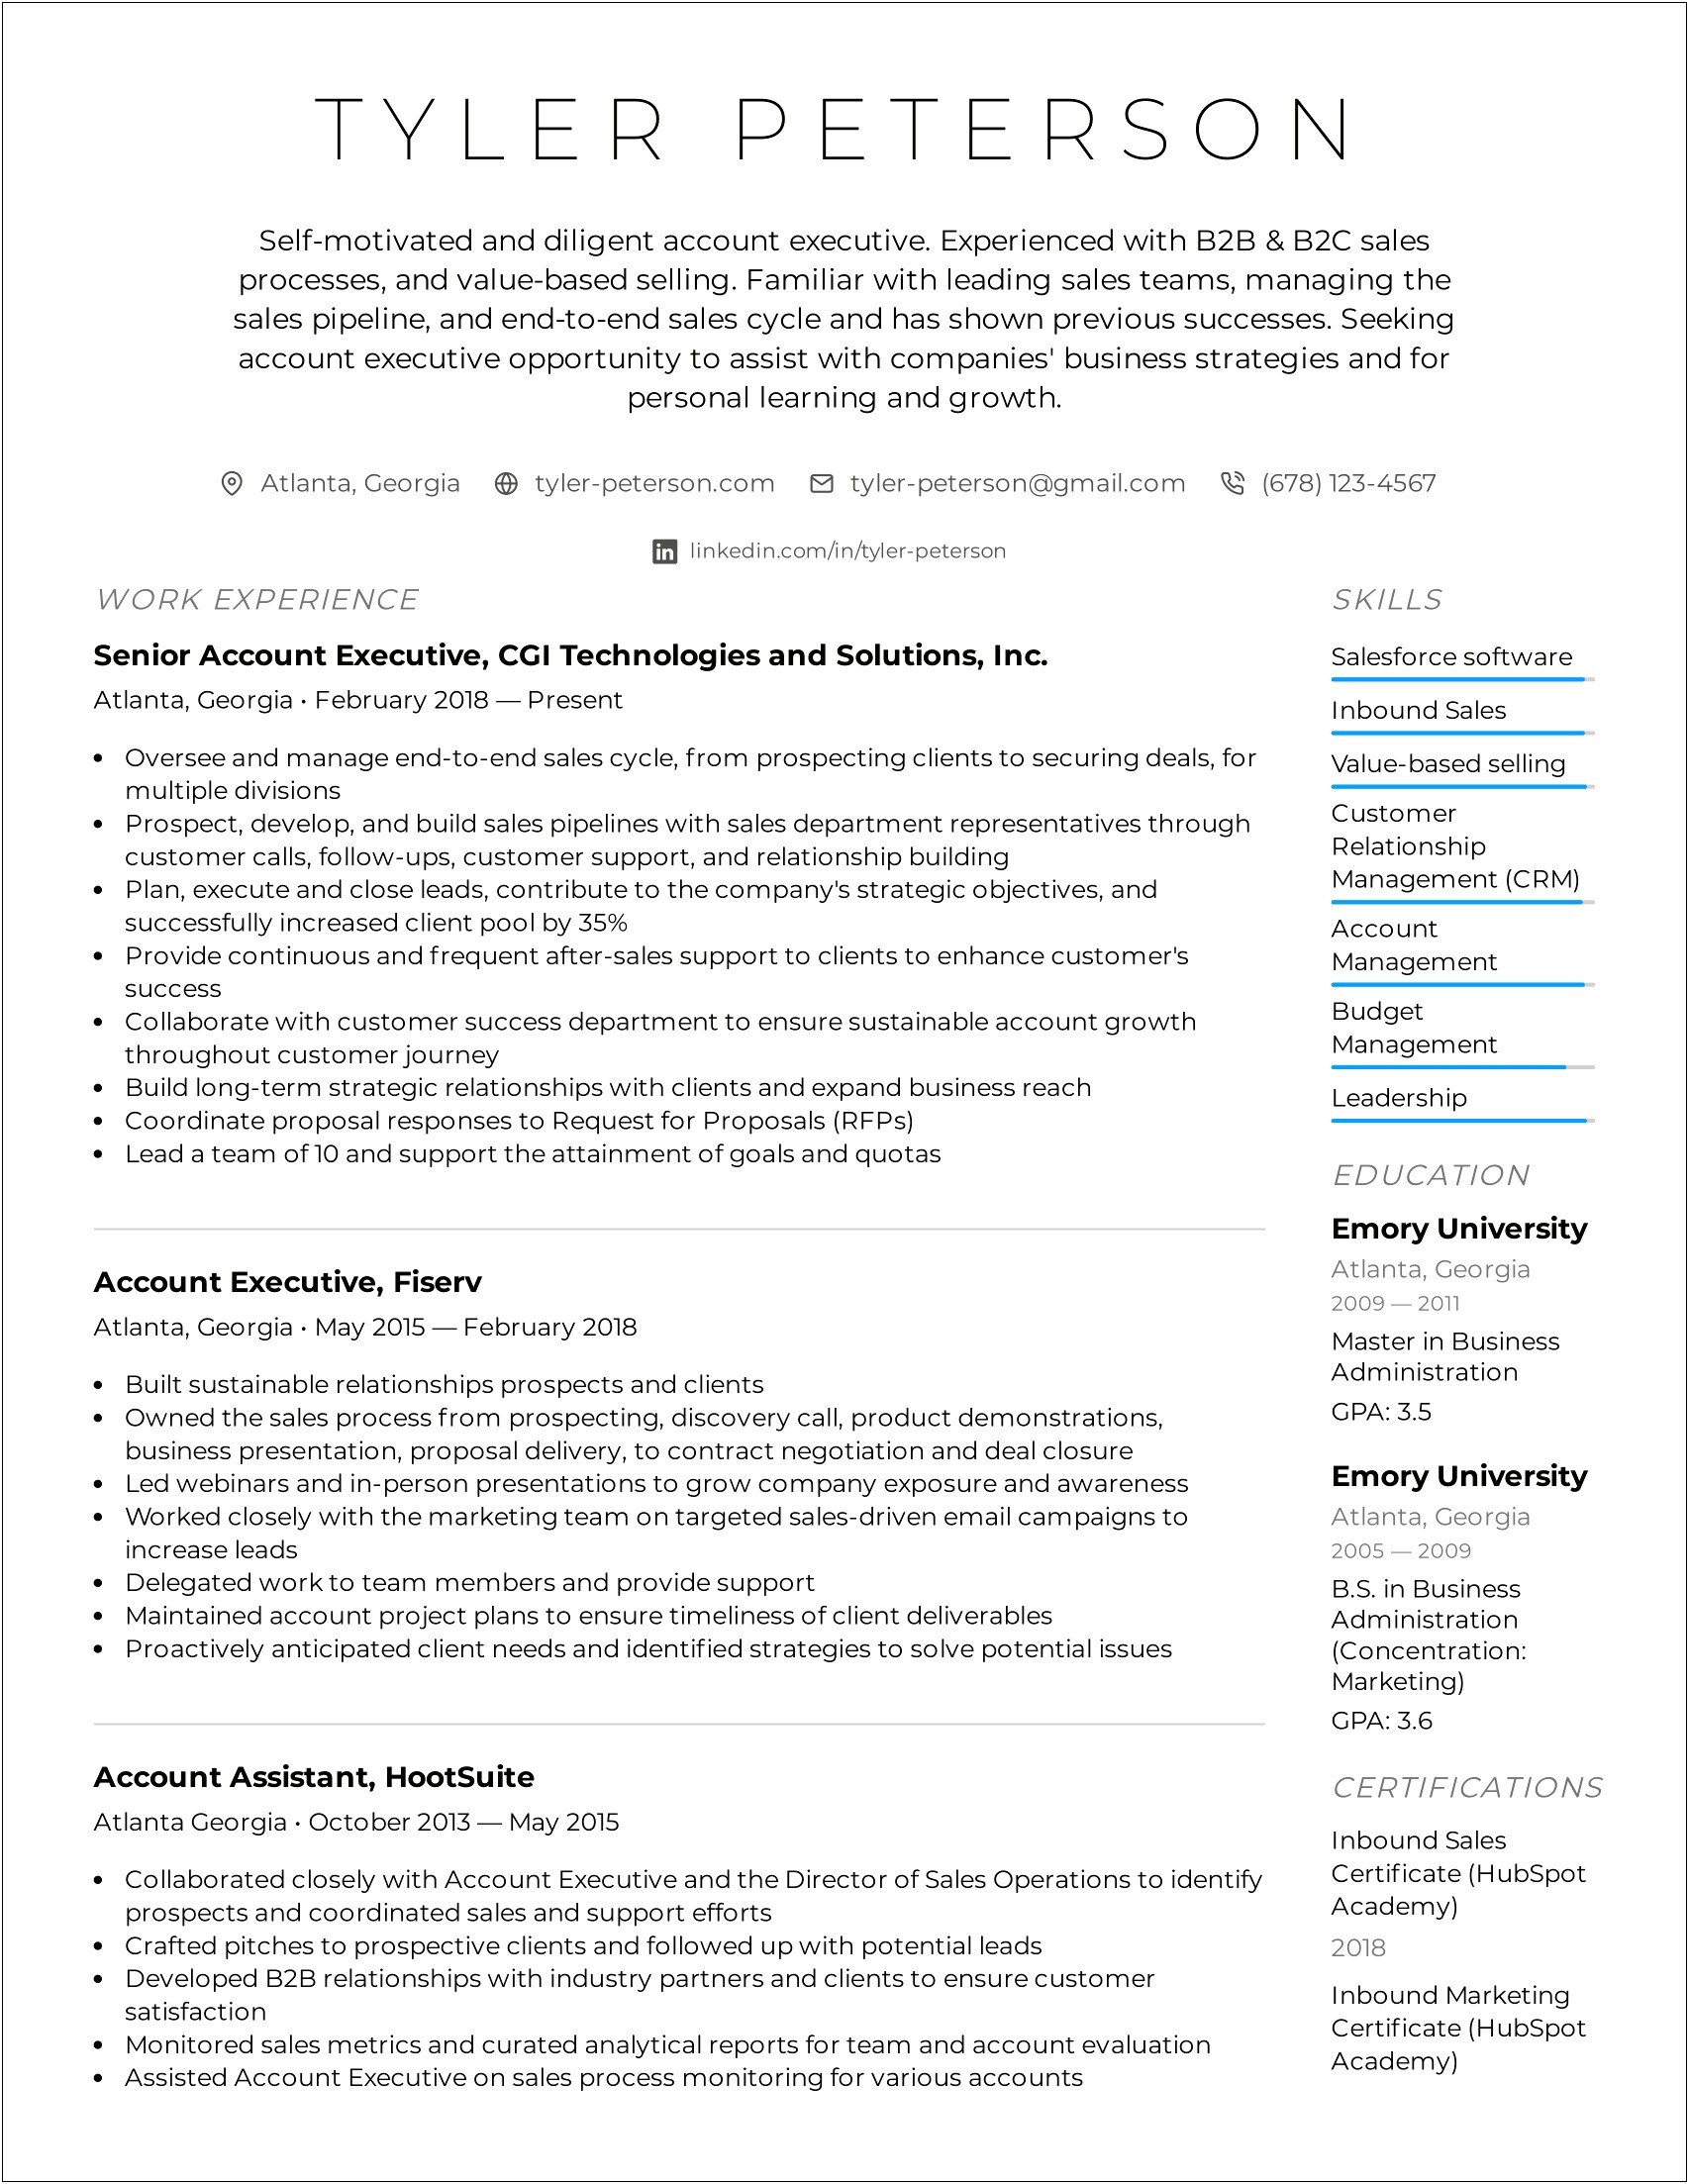 Examples Of Technology Skills On Resume